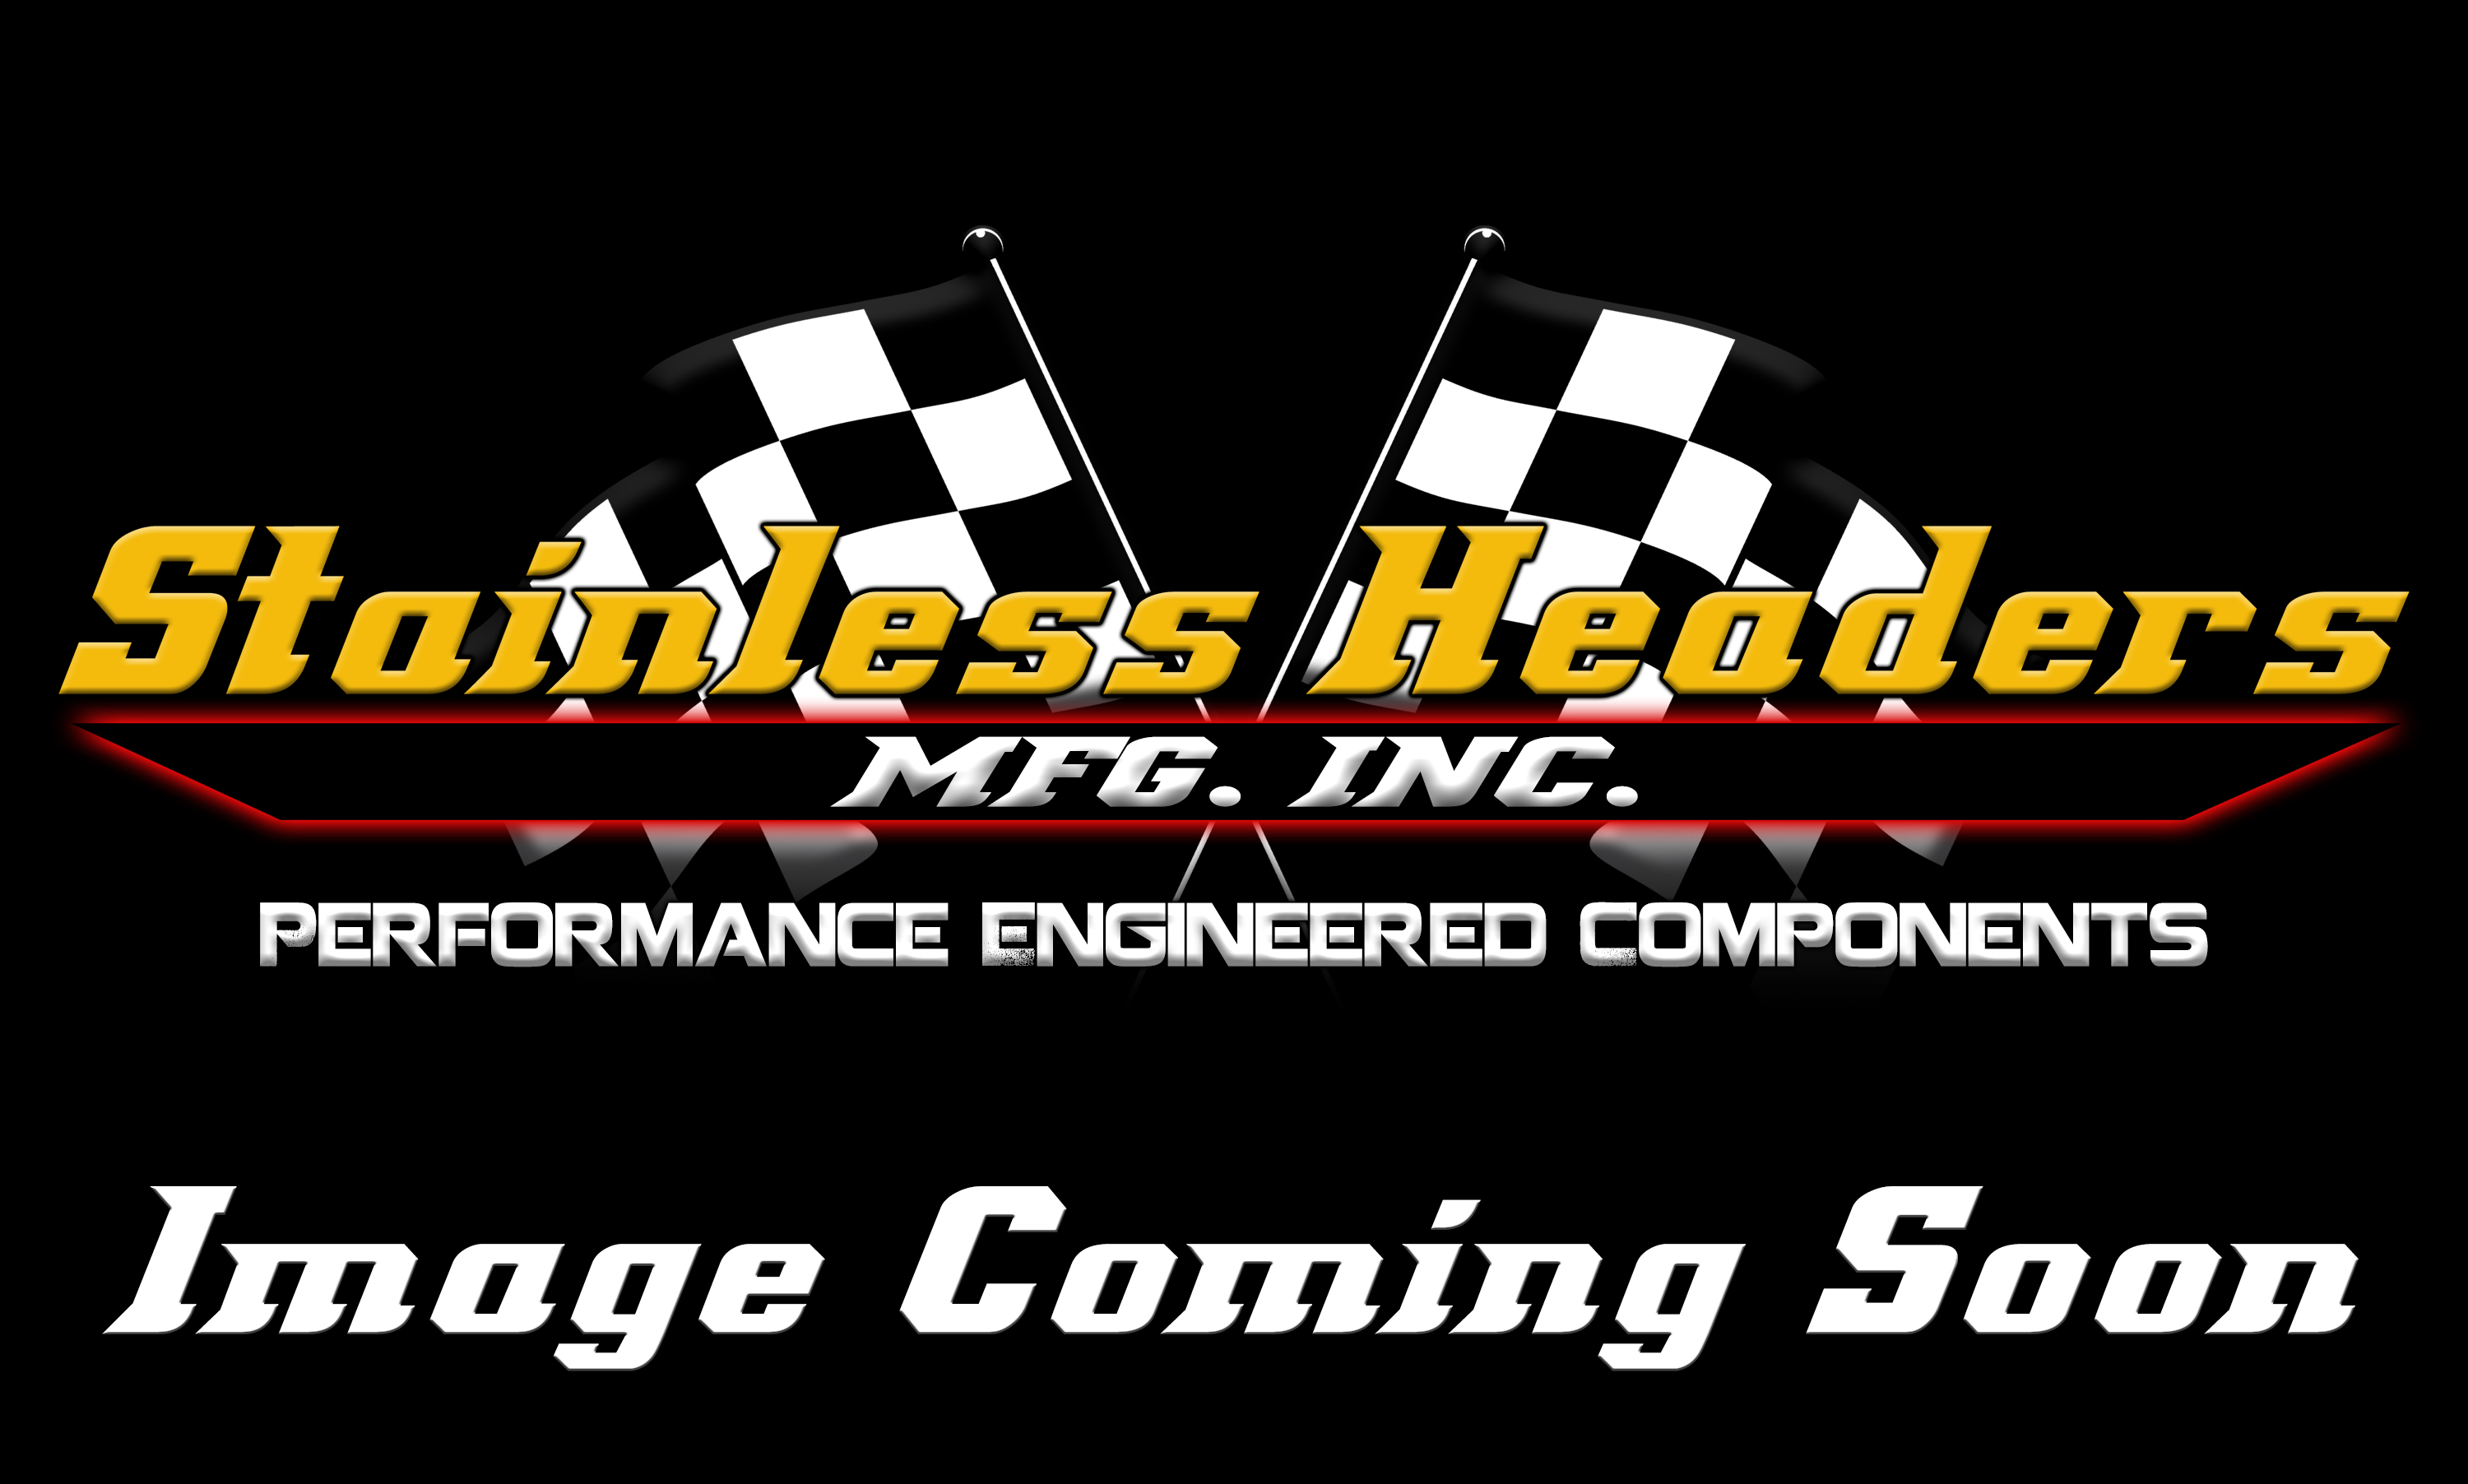 Stainless Headers - 2 1/2" Primary 5 into 1 Performance Merge Collector-16ga 321ss - Image 1